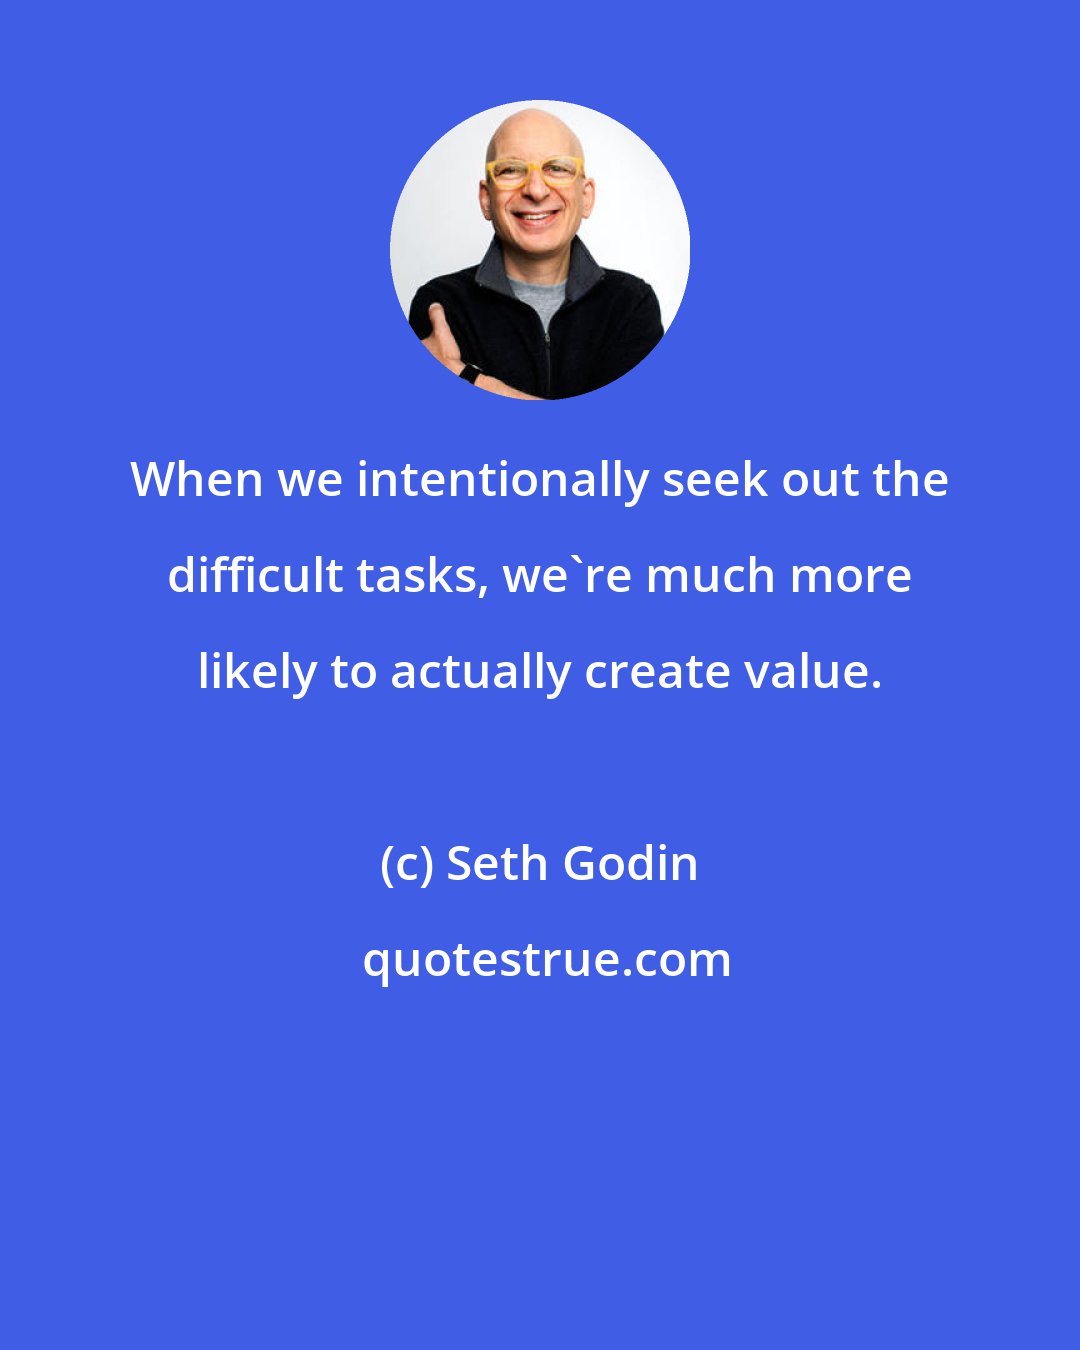 Seth Godin: When we intentionally seek out the difficult tasks, we're much more likely to actually create value.